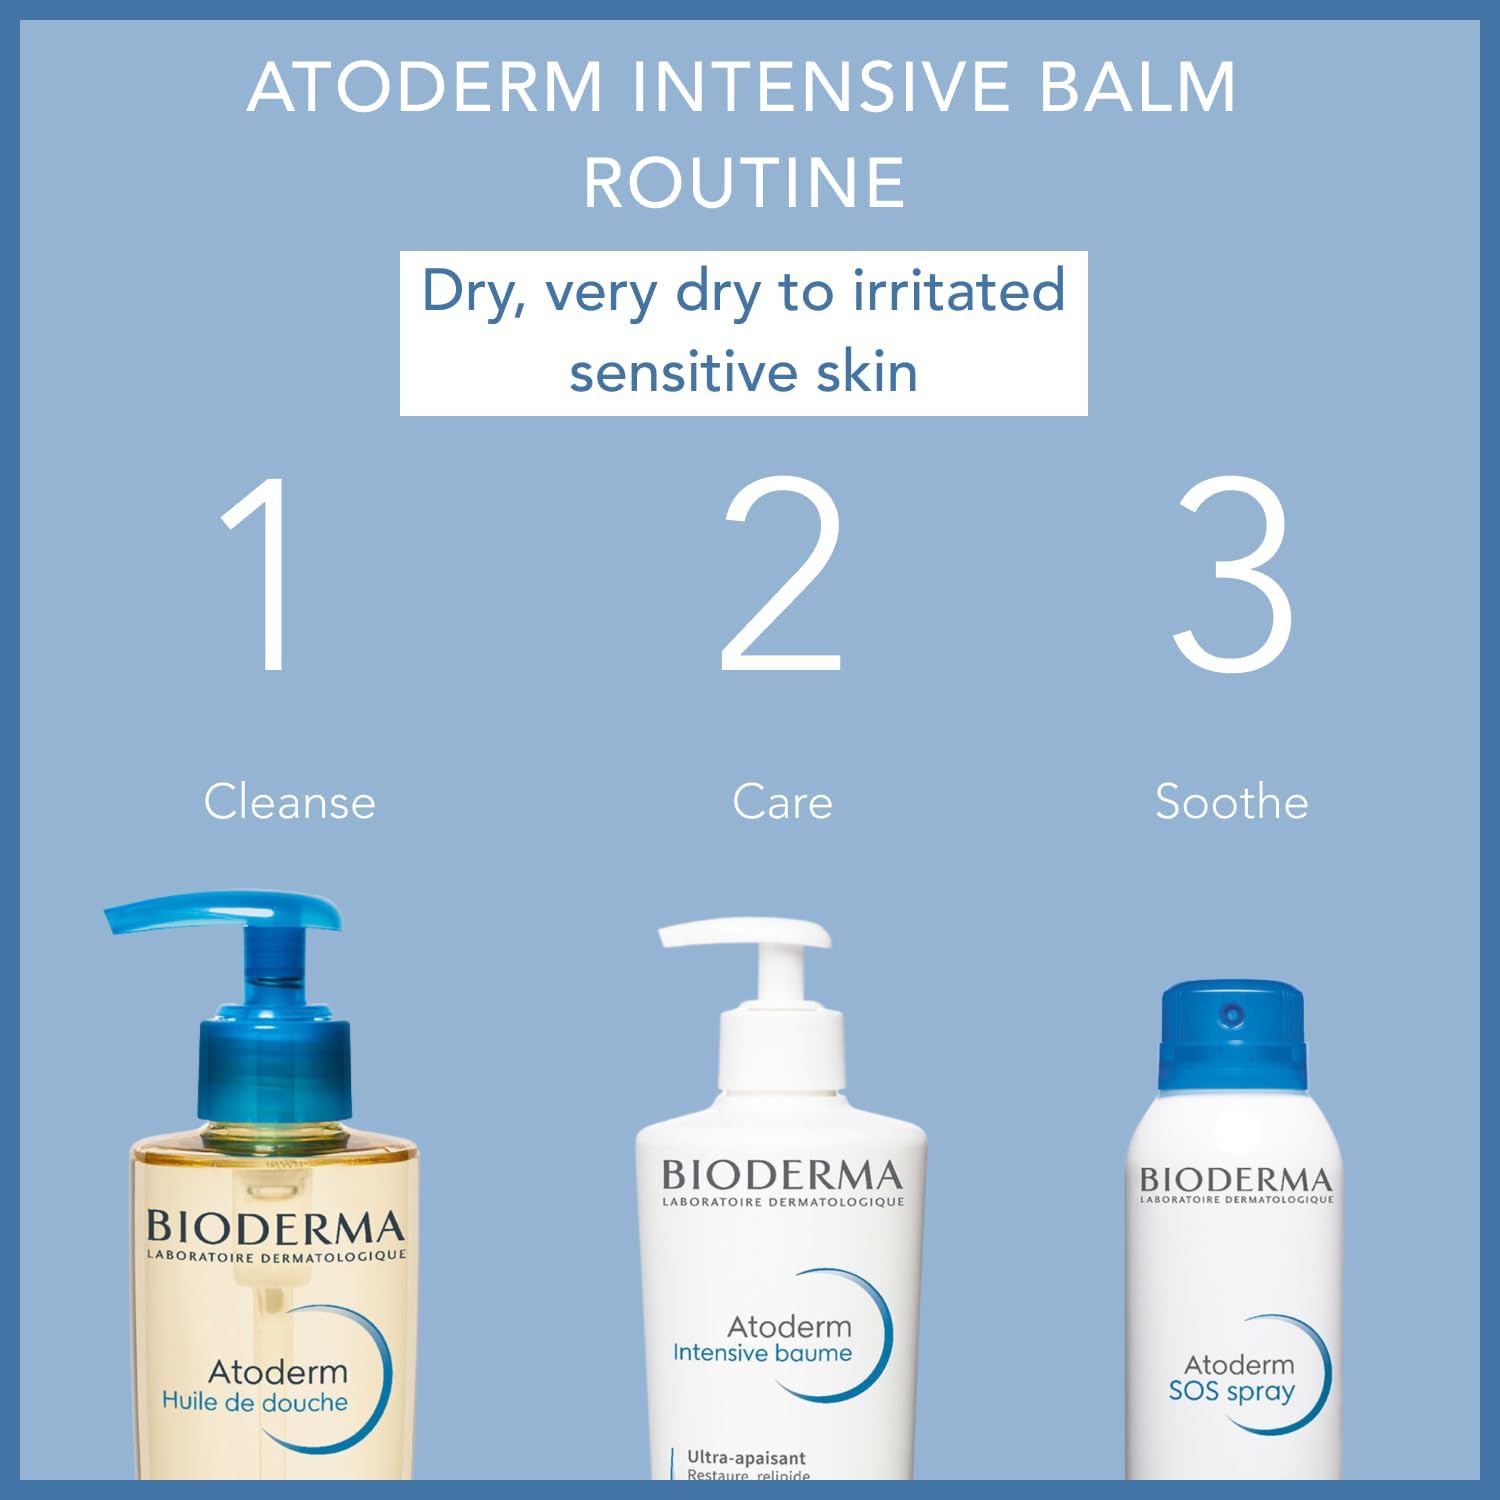 Bioderma Atoderm Intensive Balm - Ultra-Soothing Emollient Cream for Very Dry, Itchy to Eczema Prone Skin, Moisturiser Nourishes, Soothes & Reduces Itching